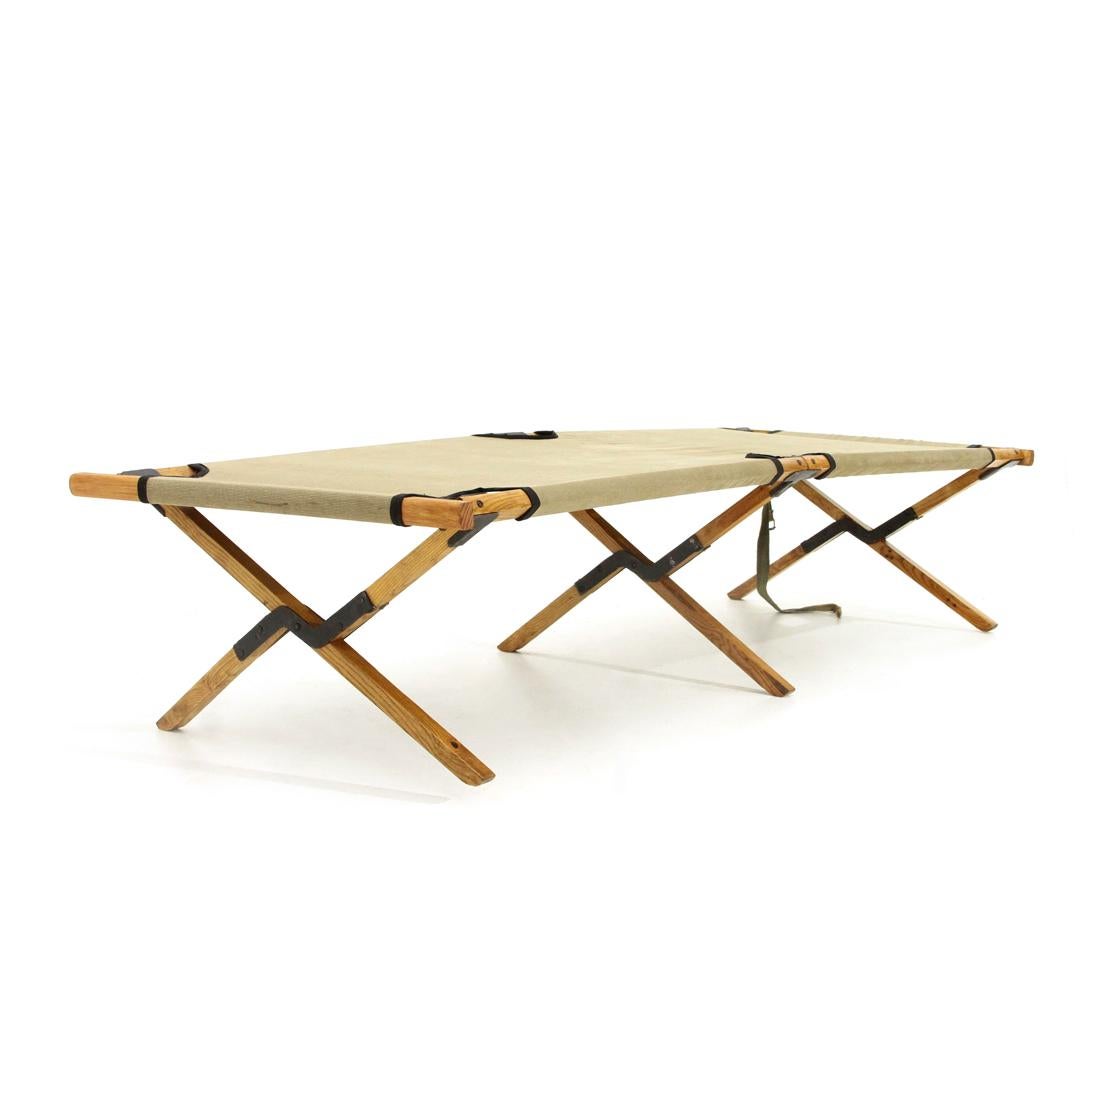 Italian Midcentury Outdoor Daybed in Wood by Carlo Enrico Rava, 1940s